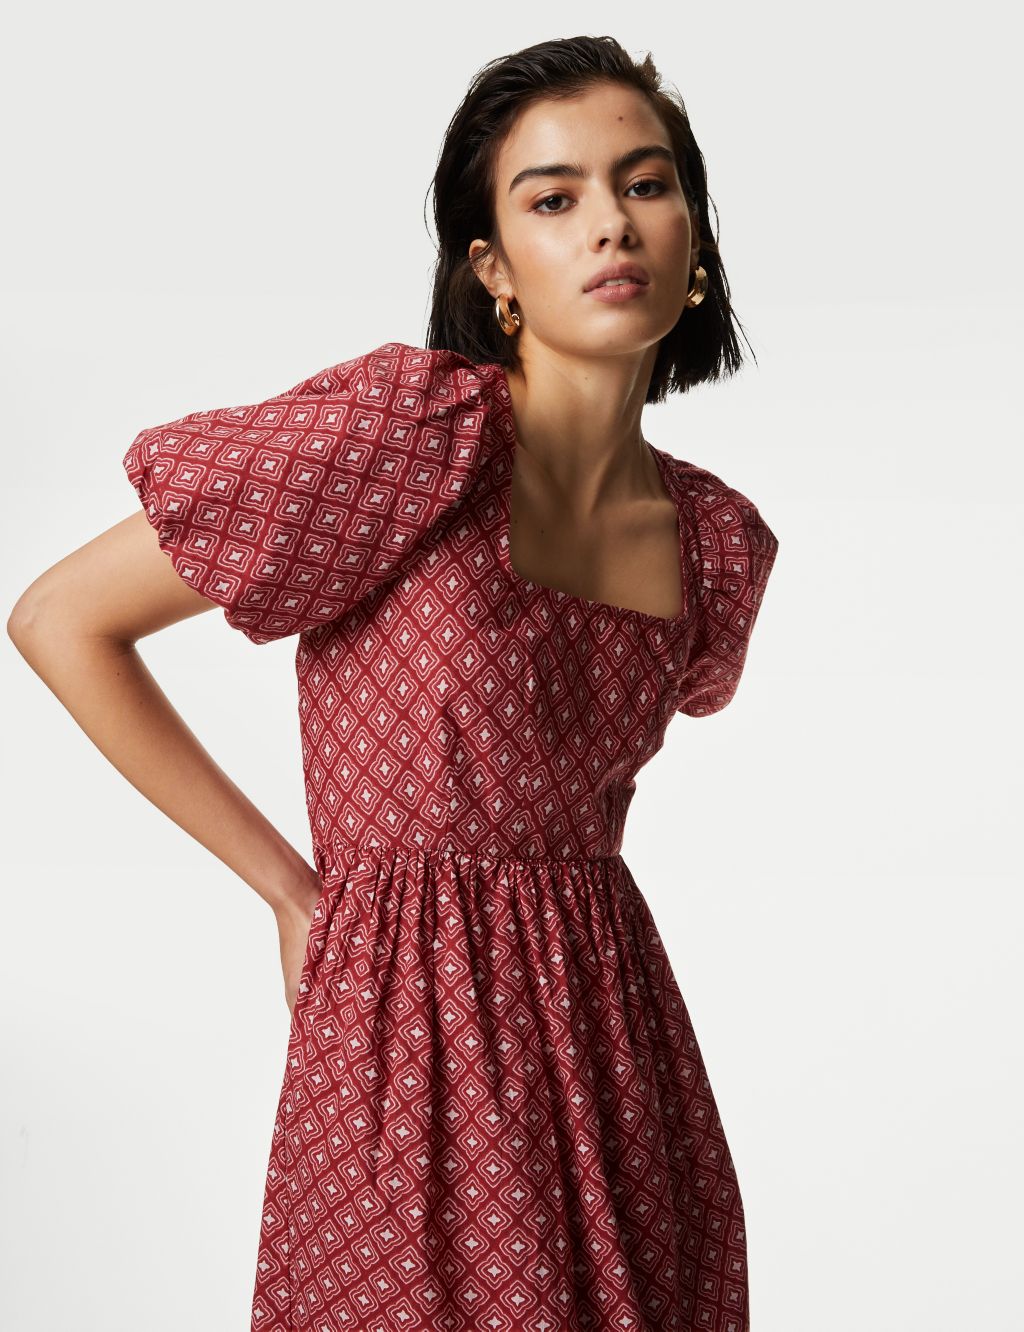 Shop the 21 Best Fruit Printed Dresses, Tops, and More to Sport